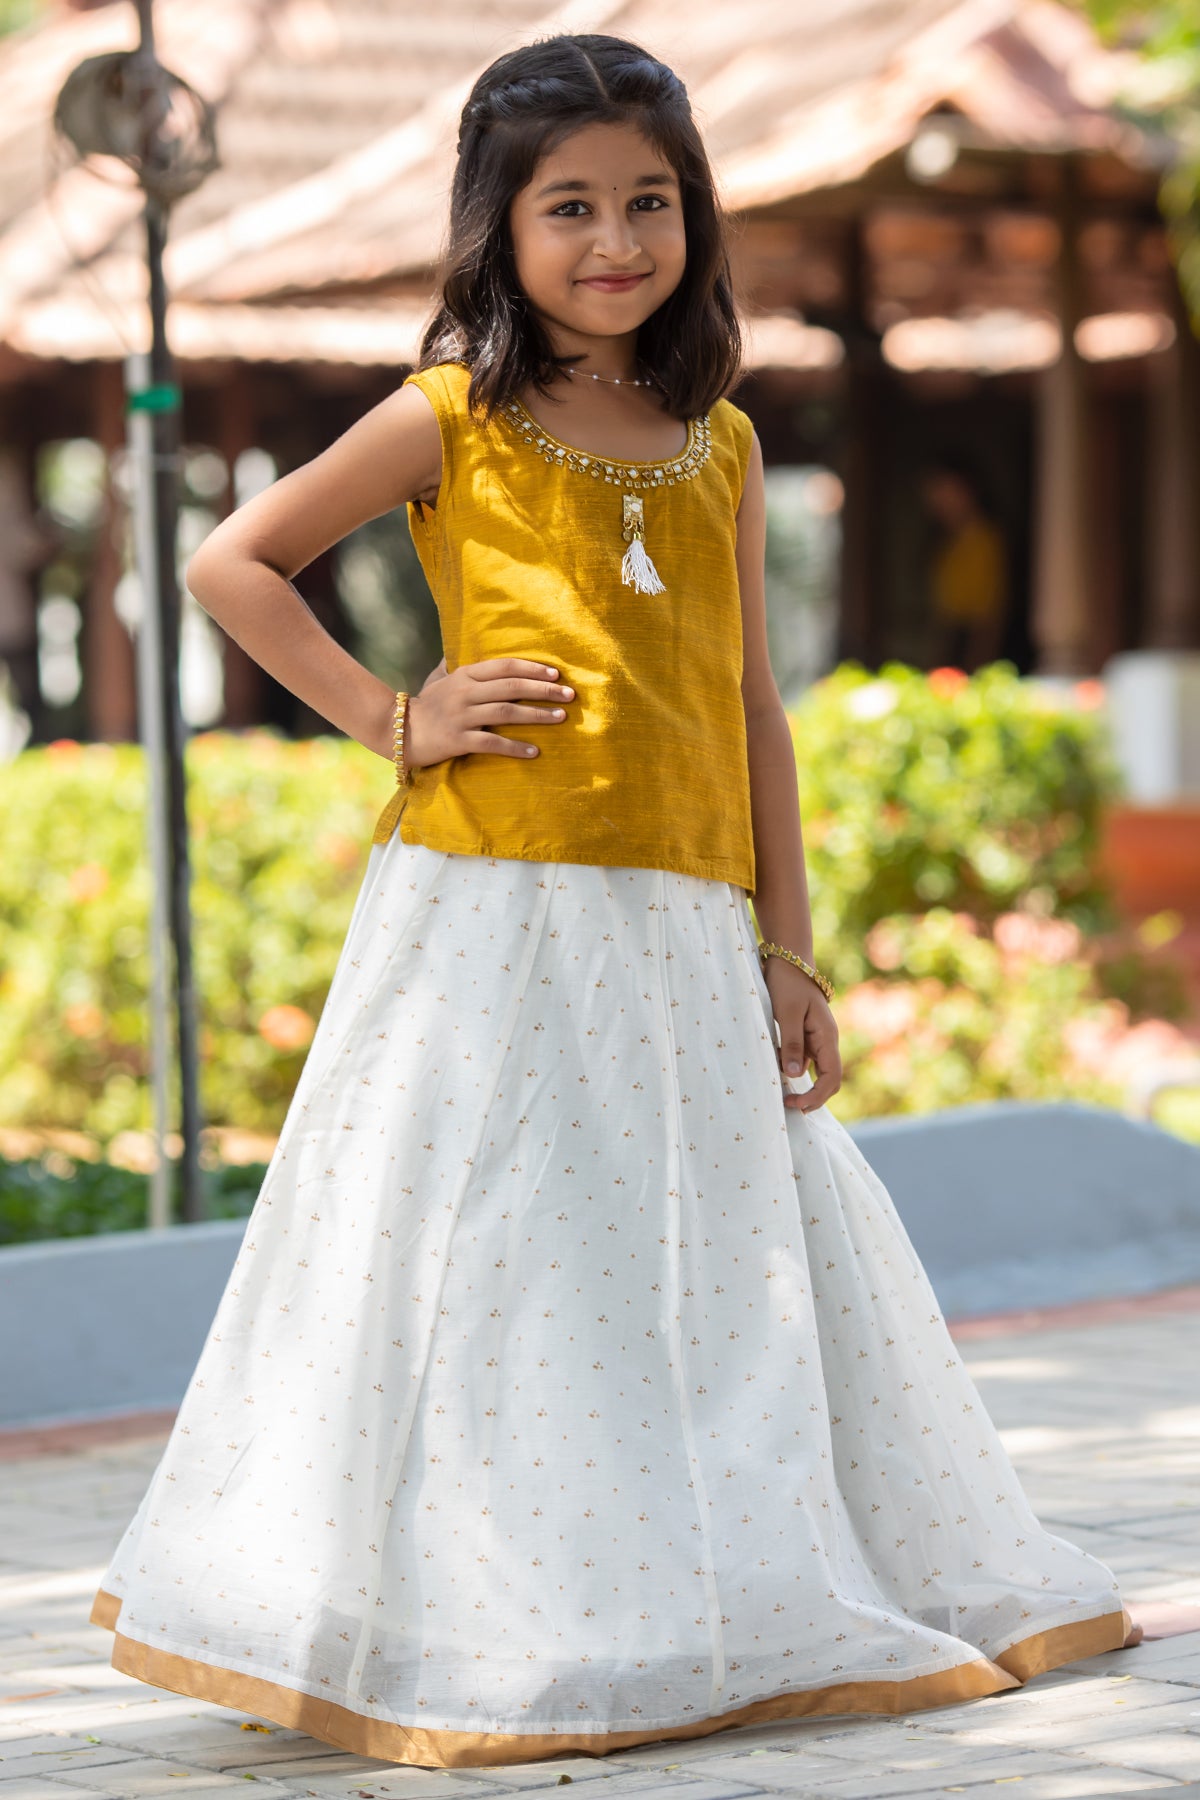 Floral Cutwork Embroidered Sleeveless Top & Digital Printed Skirt Set -  Yellow & White